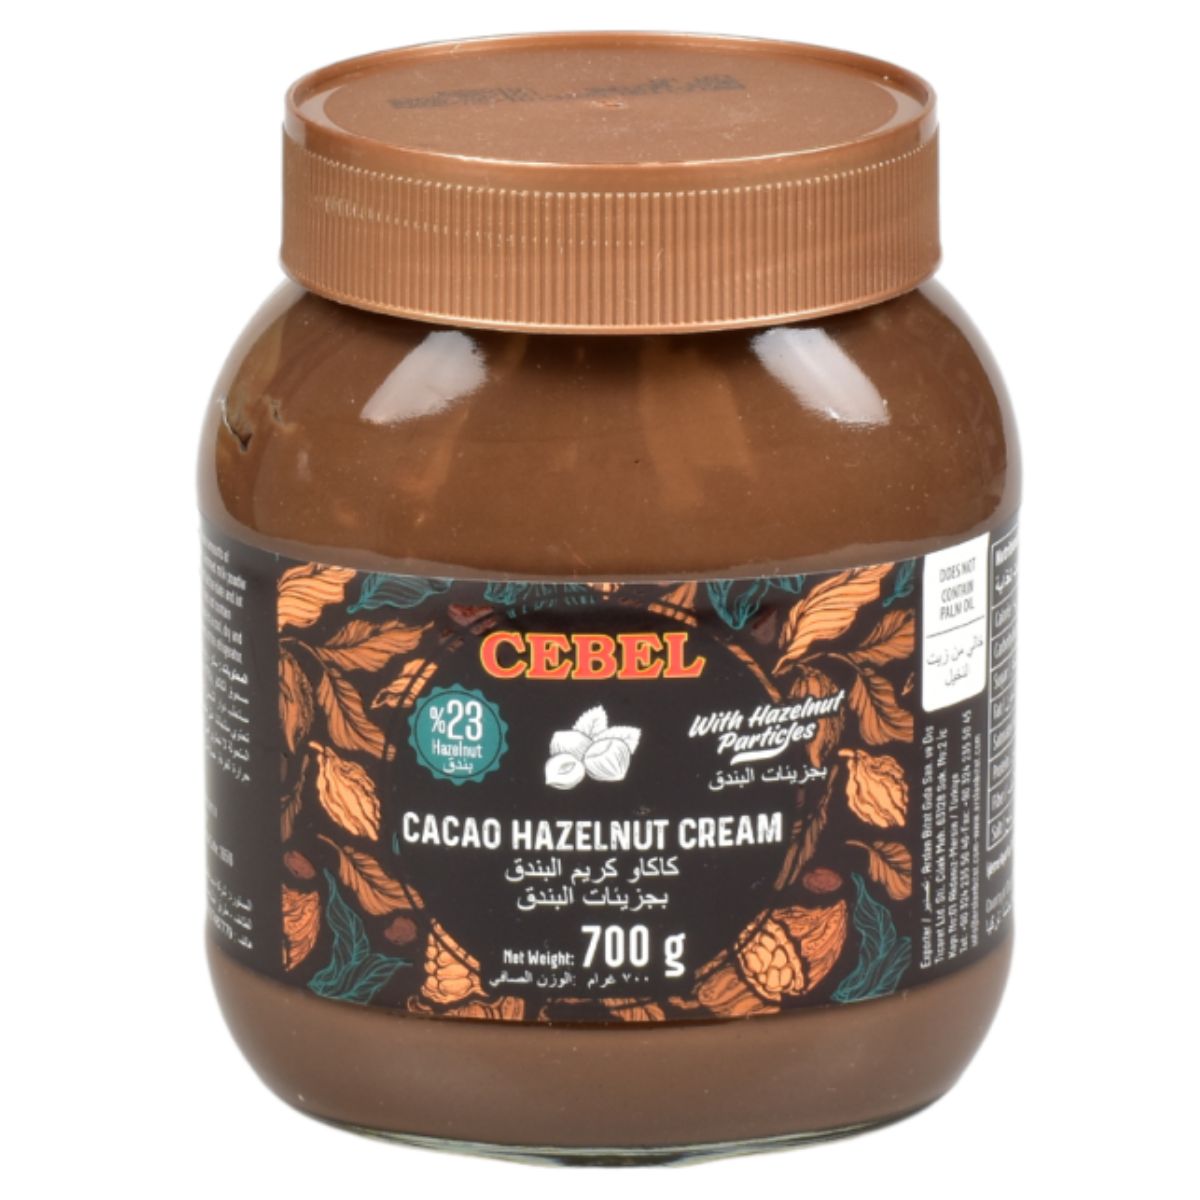 A jar of Cebel - Crunchy Hazelnut Cream with Cocoa weighing 700 grams.